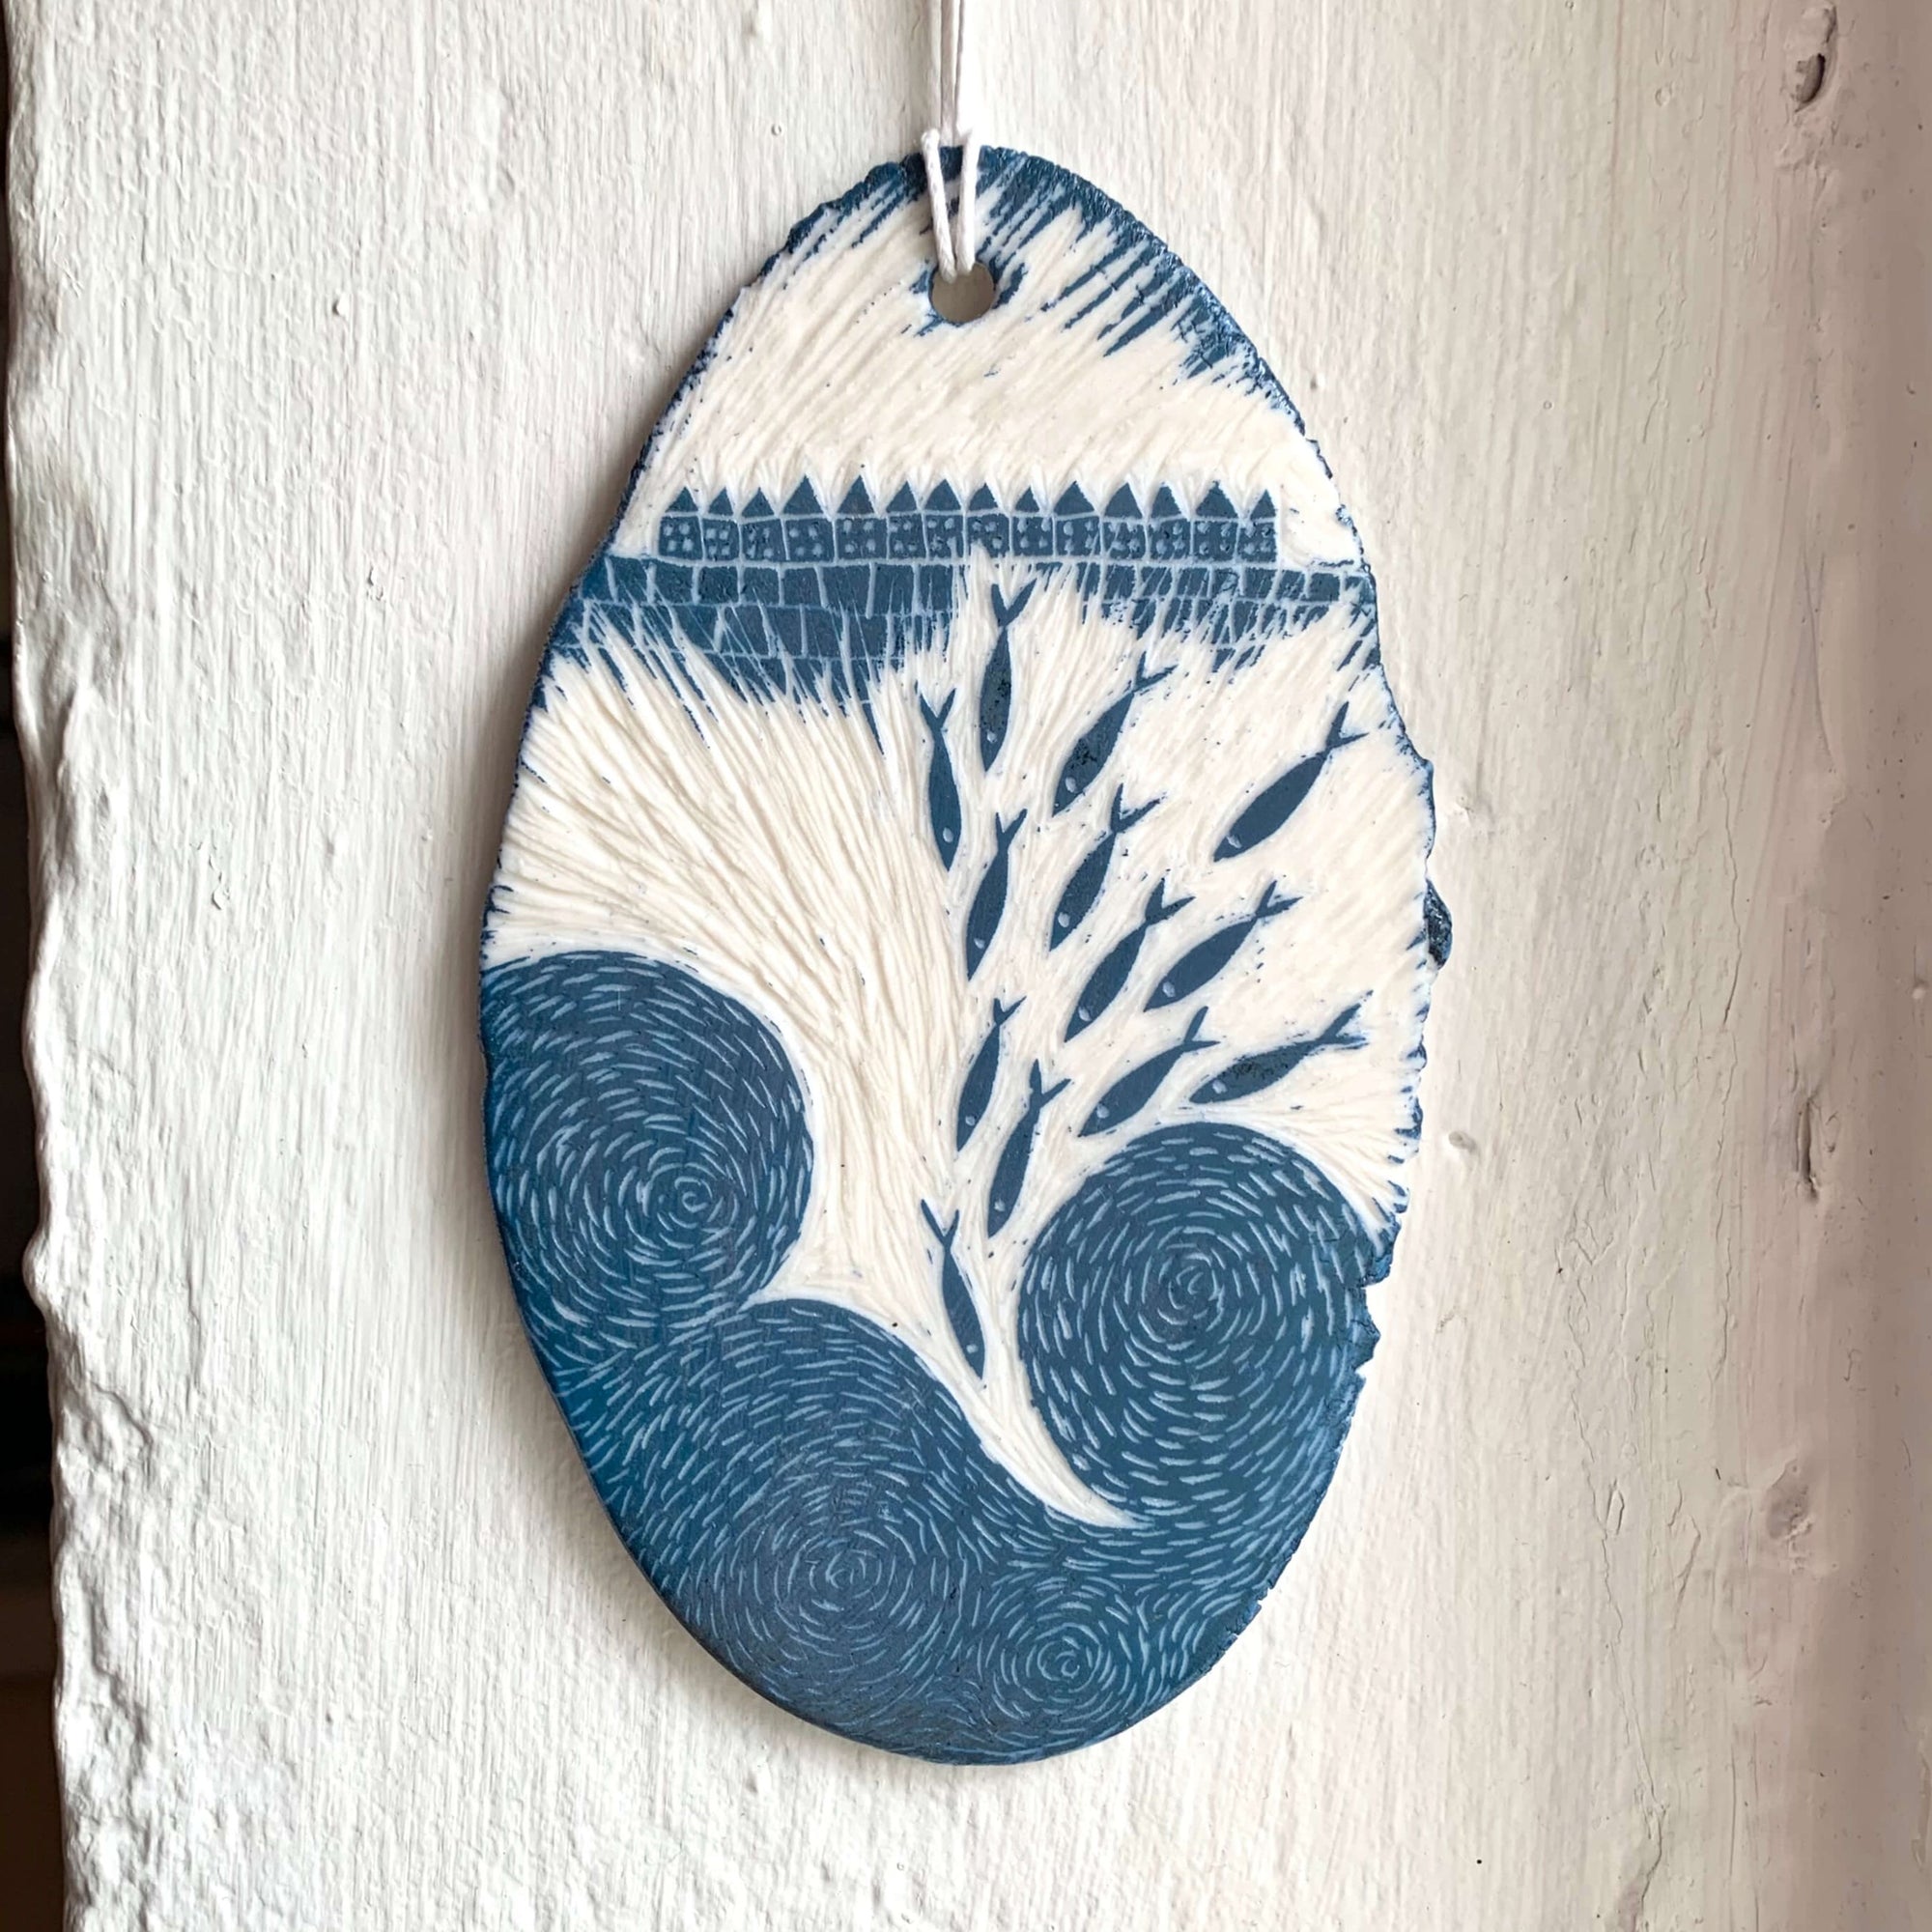 Handcrafted by Sarah Livingstone. White and blue porcelain rough oval shaped hanging, with abstract waves, fishes and small buildings carved into it.